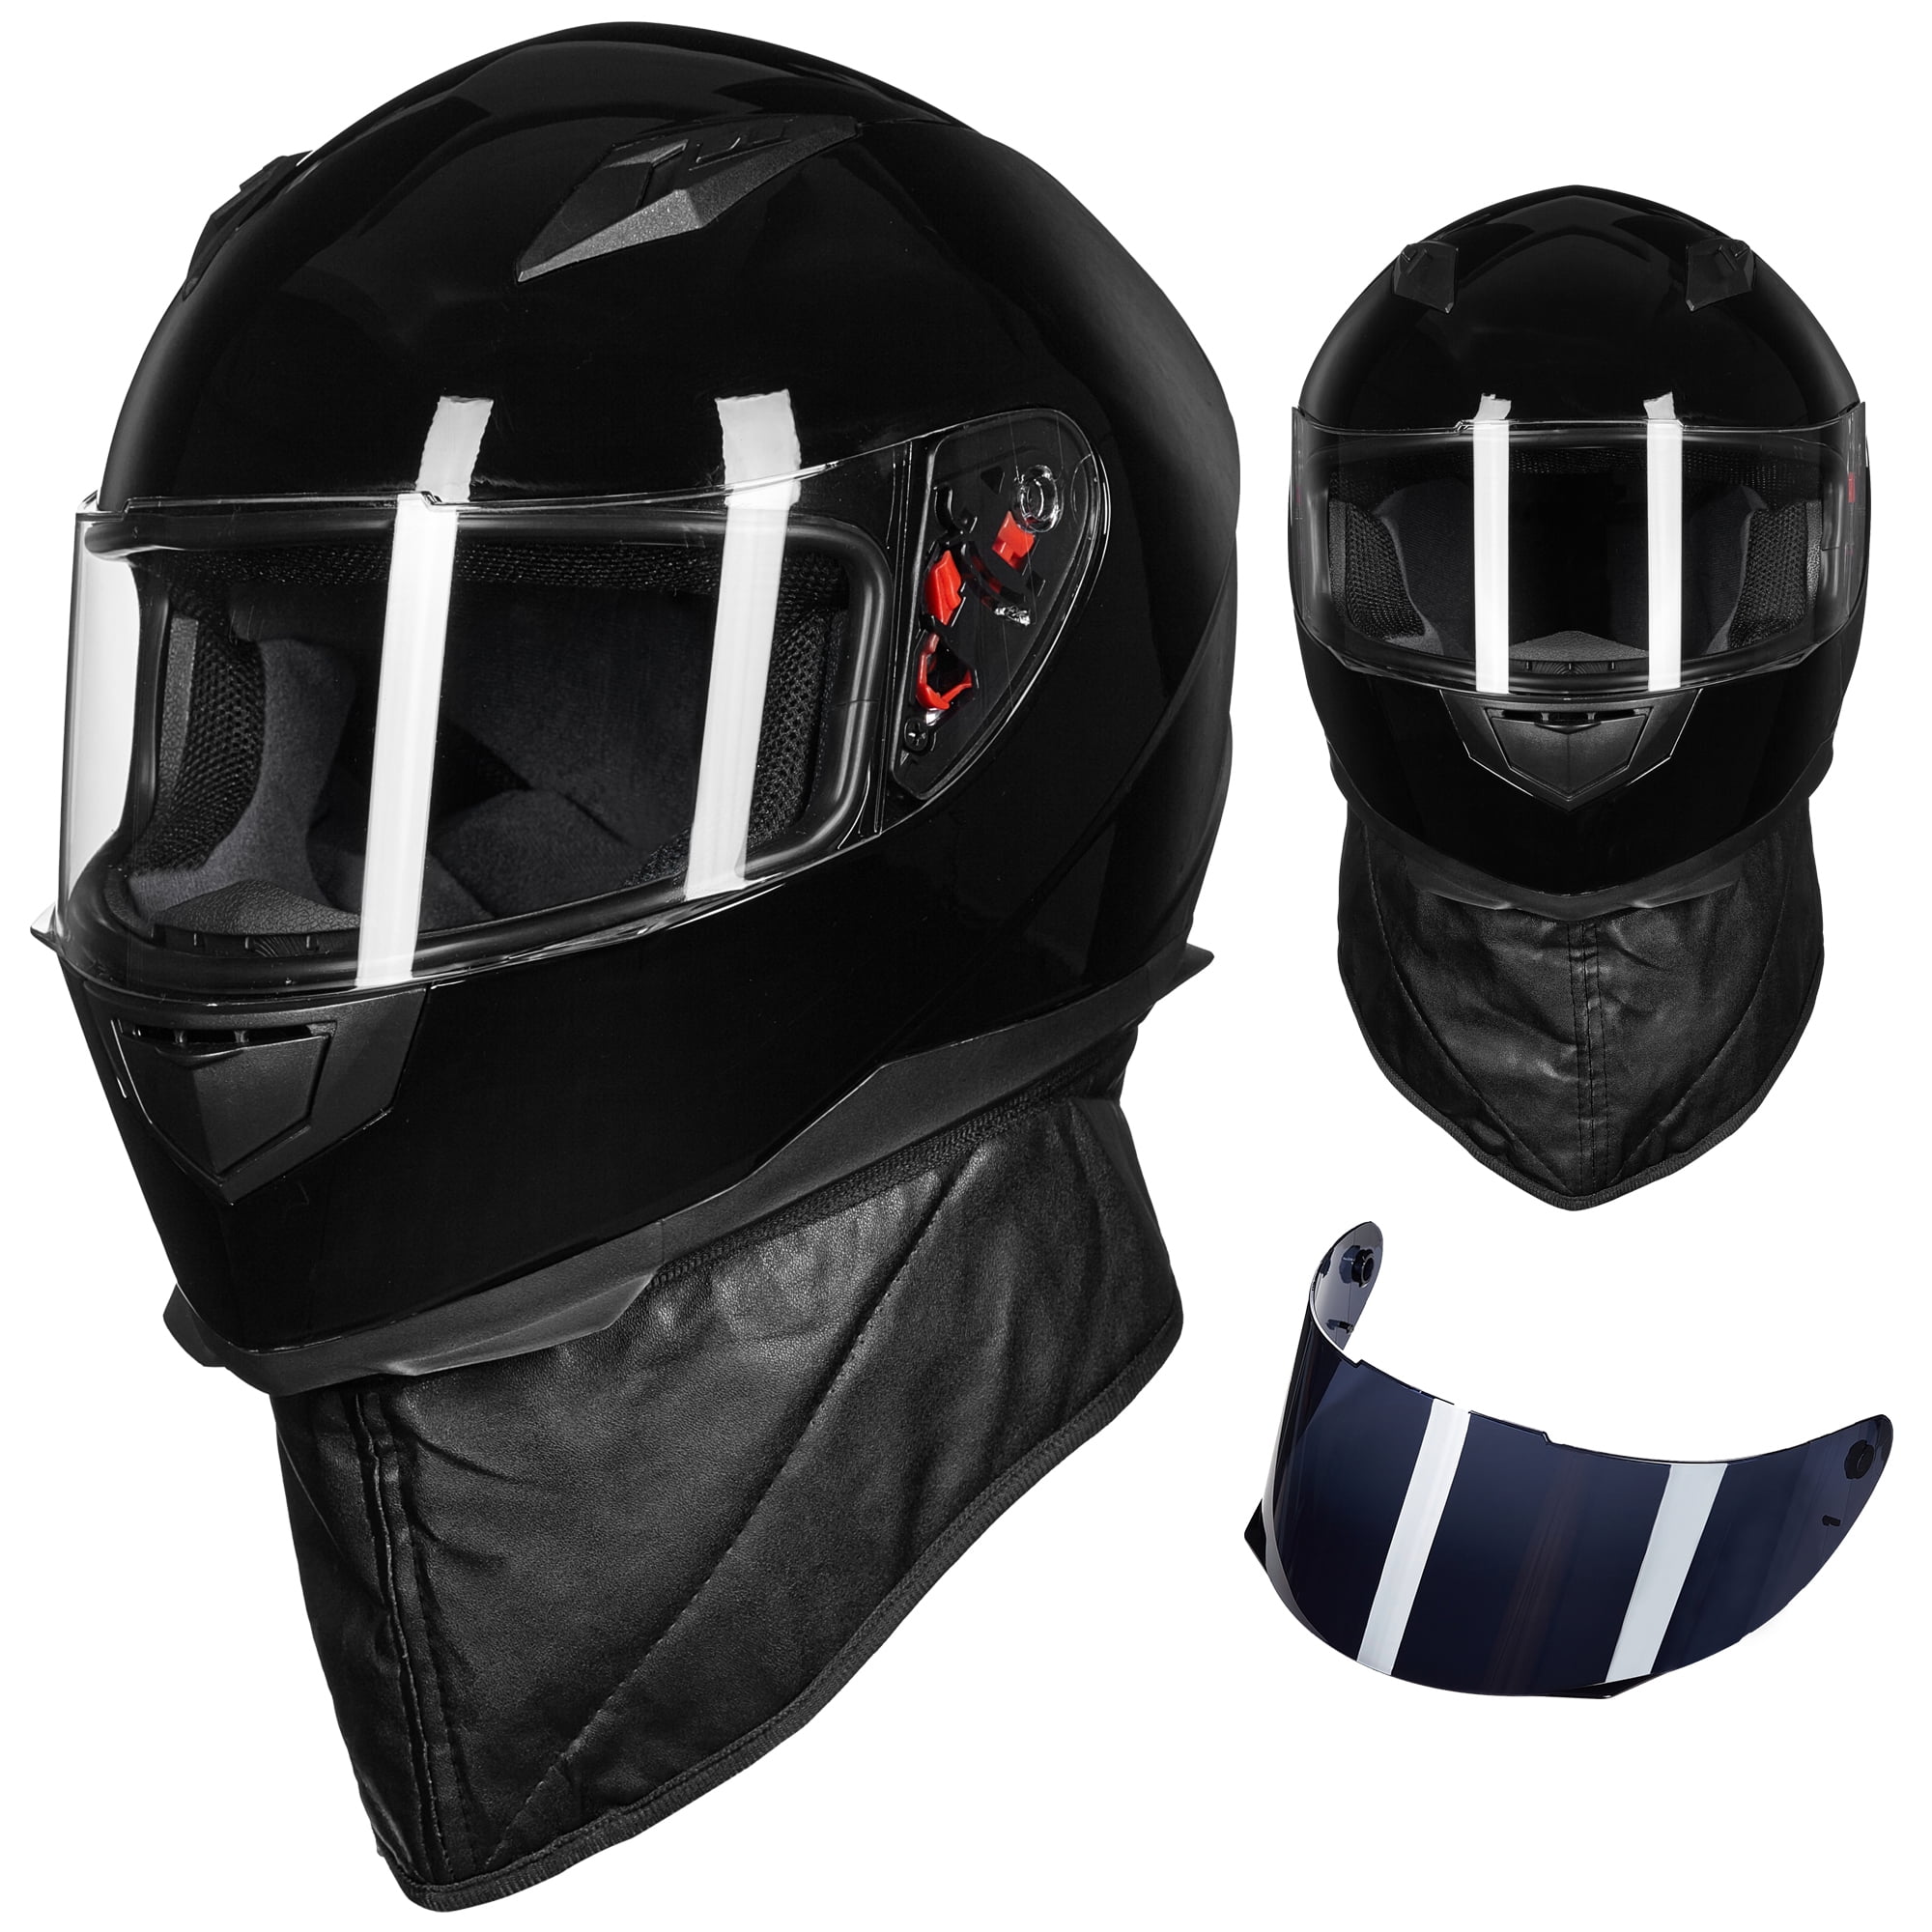 Ilm Full Face Motorcycle Street Bike Helmet With Removable Winter Neck Scarf 2 for sale online 